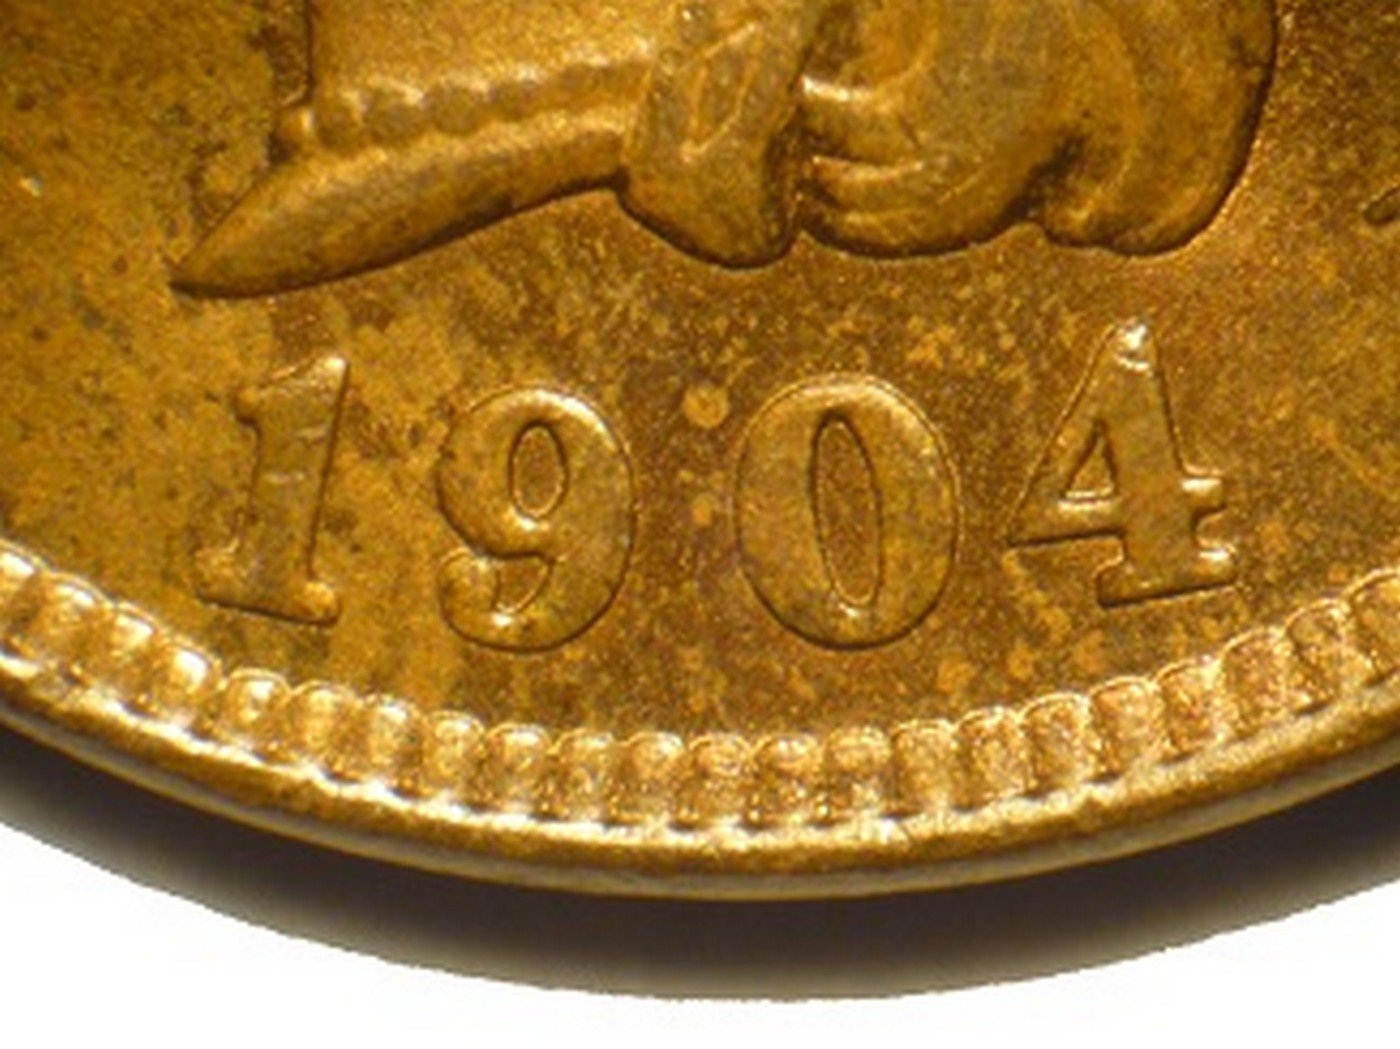 1904 RPD-017 - Indian Head Penny - Photo by David Poliquin